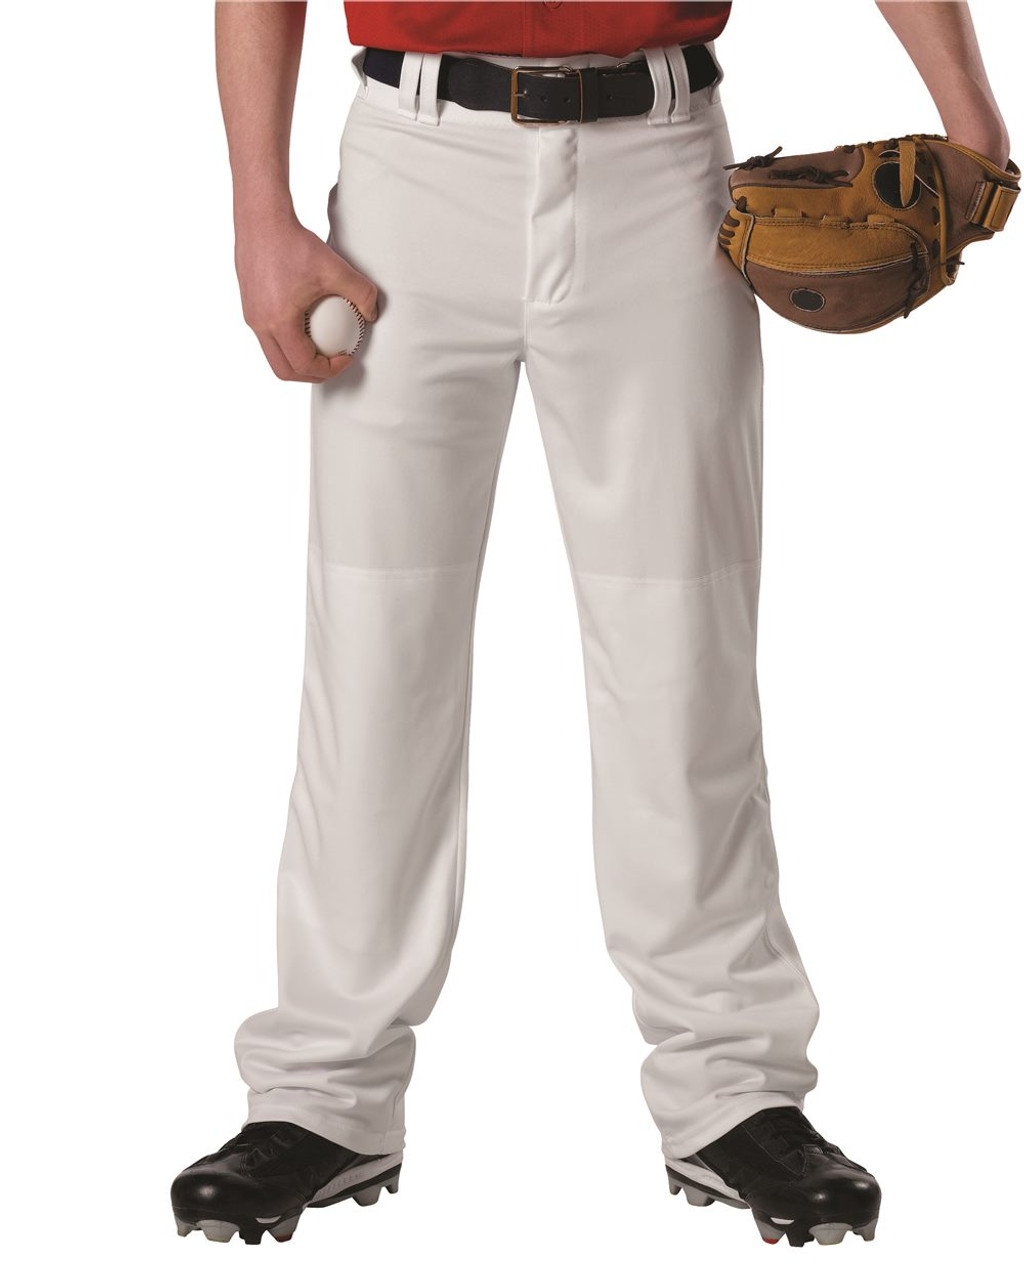 Embroidered Youth Adjustable Inseam Baseball Pants - 605WAPY